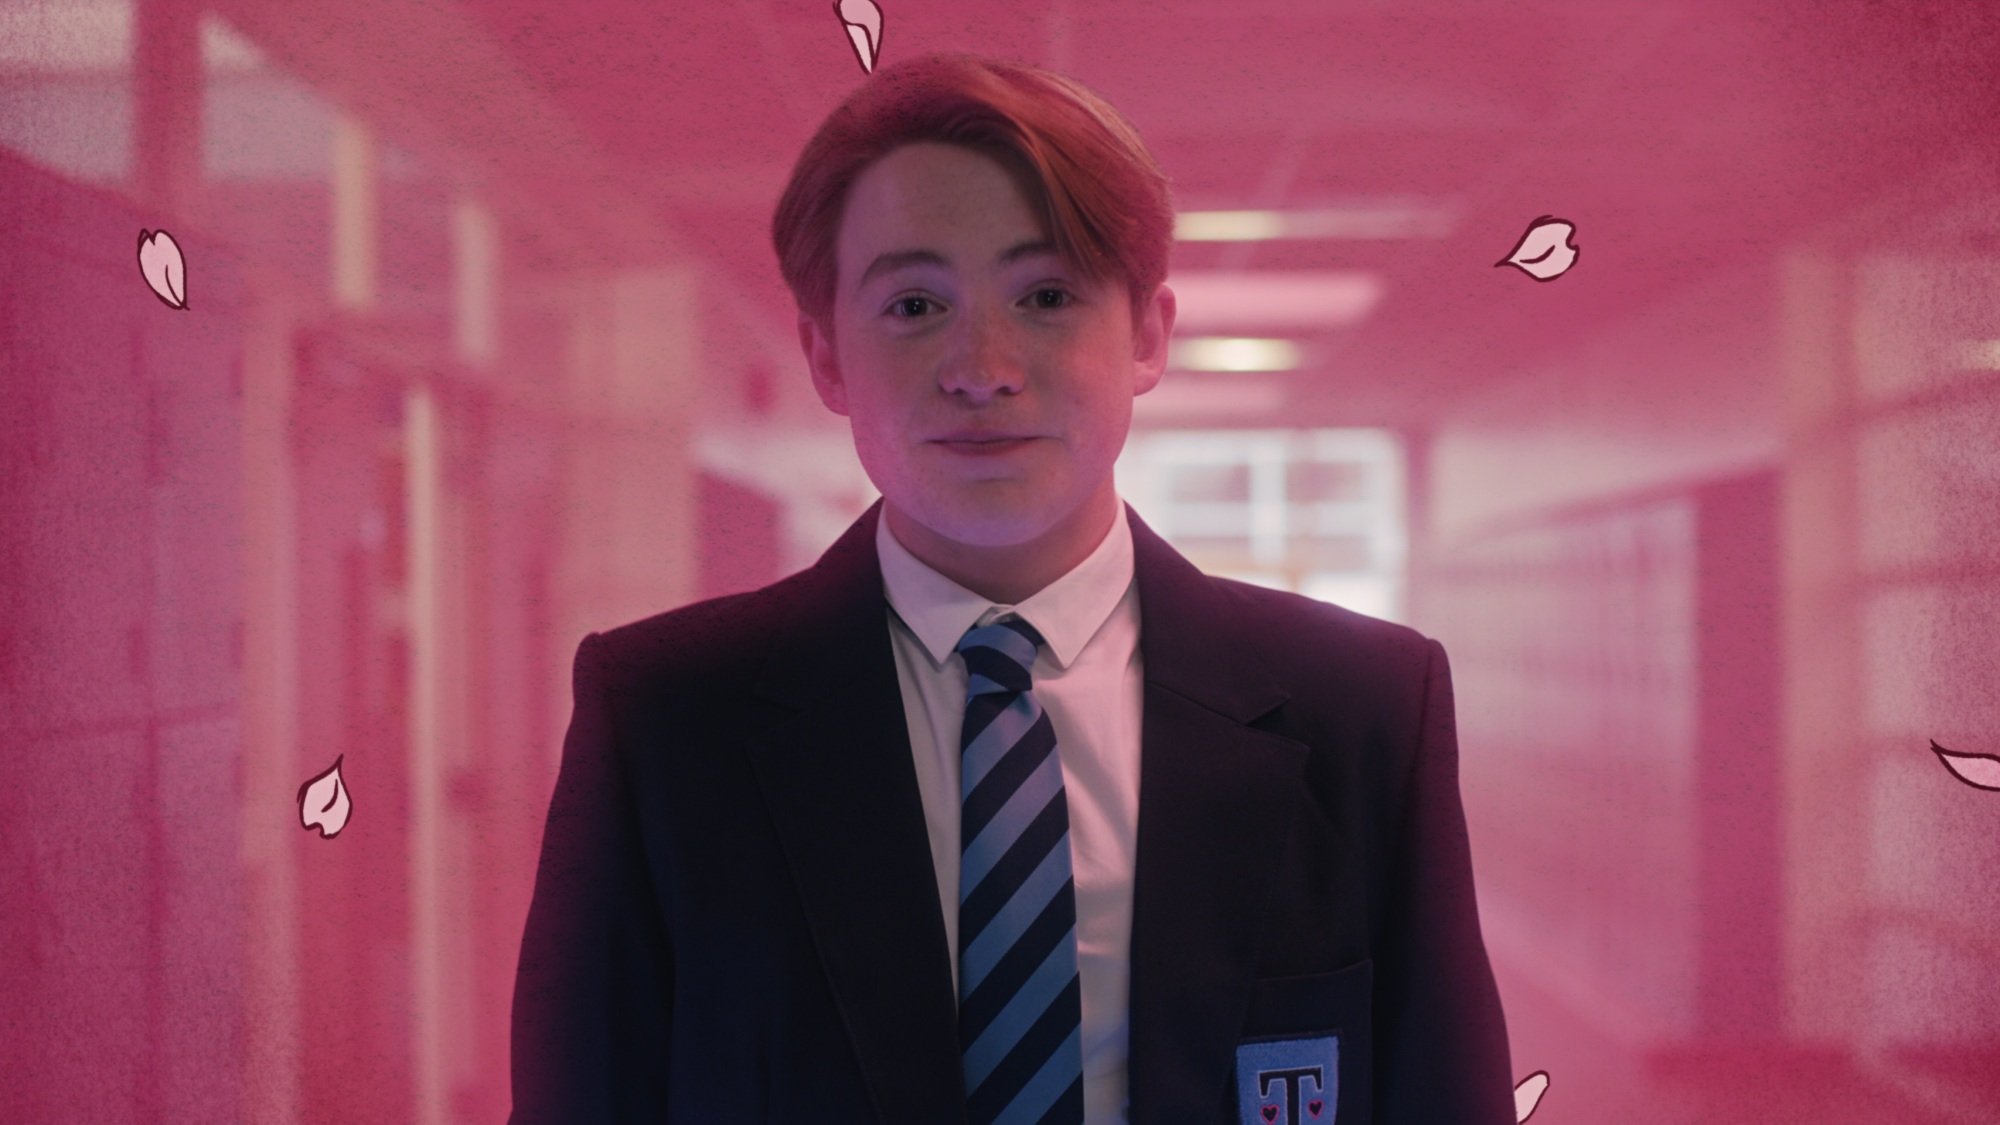 A teenage boy in a school uniform surrounded by pink light and cartoon petals.